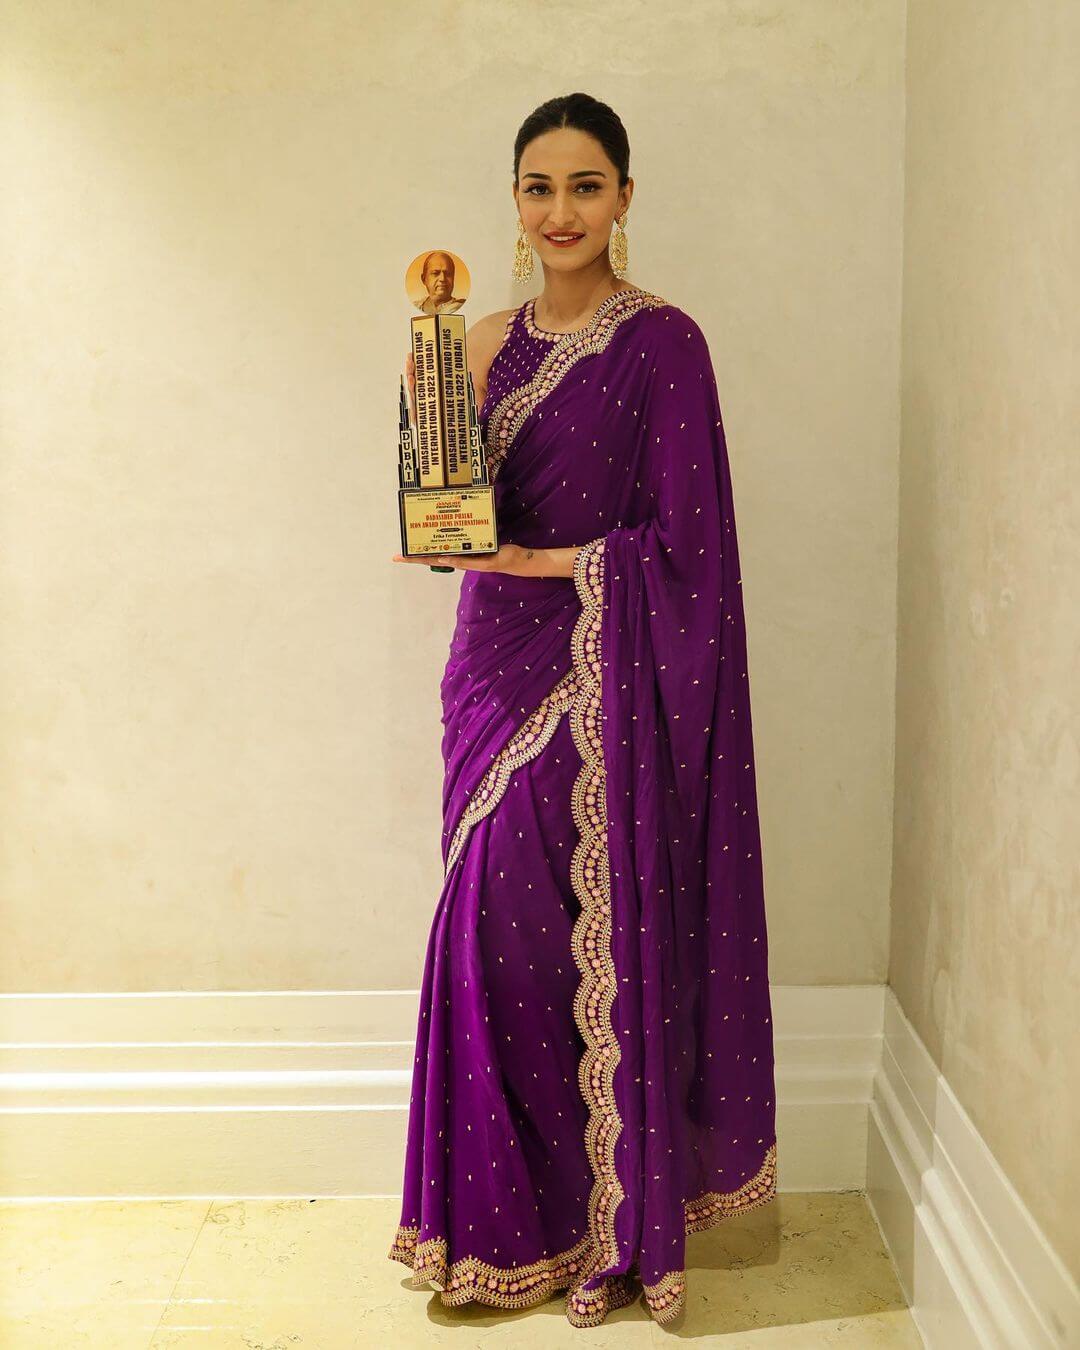 Erica Look Extremely Beautiful In Purple Saree Outfit